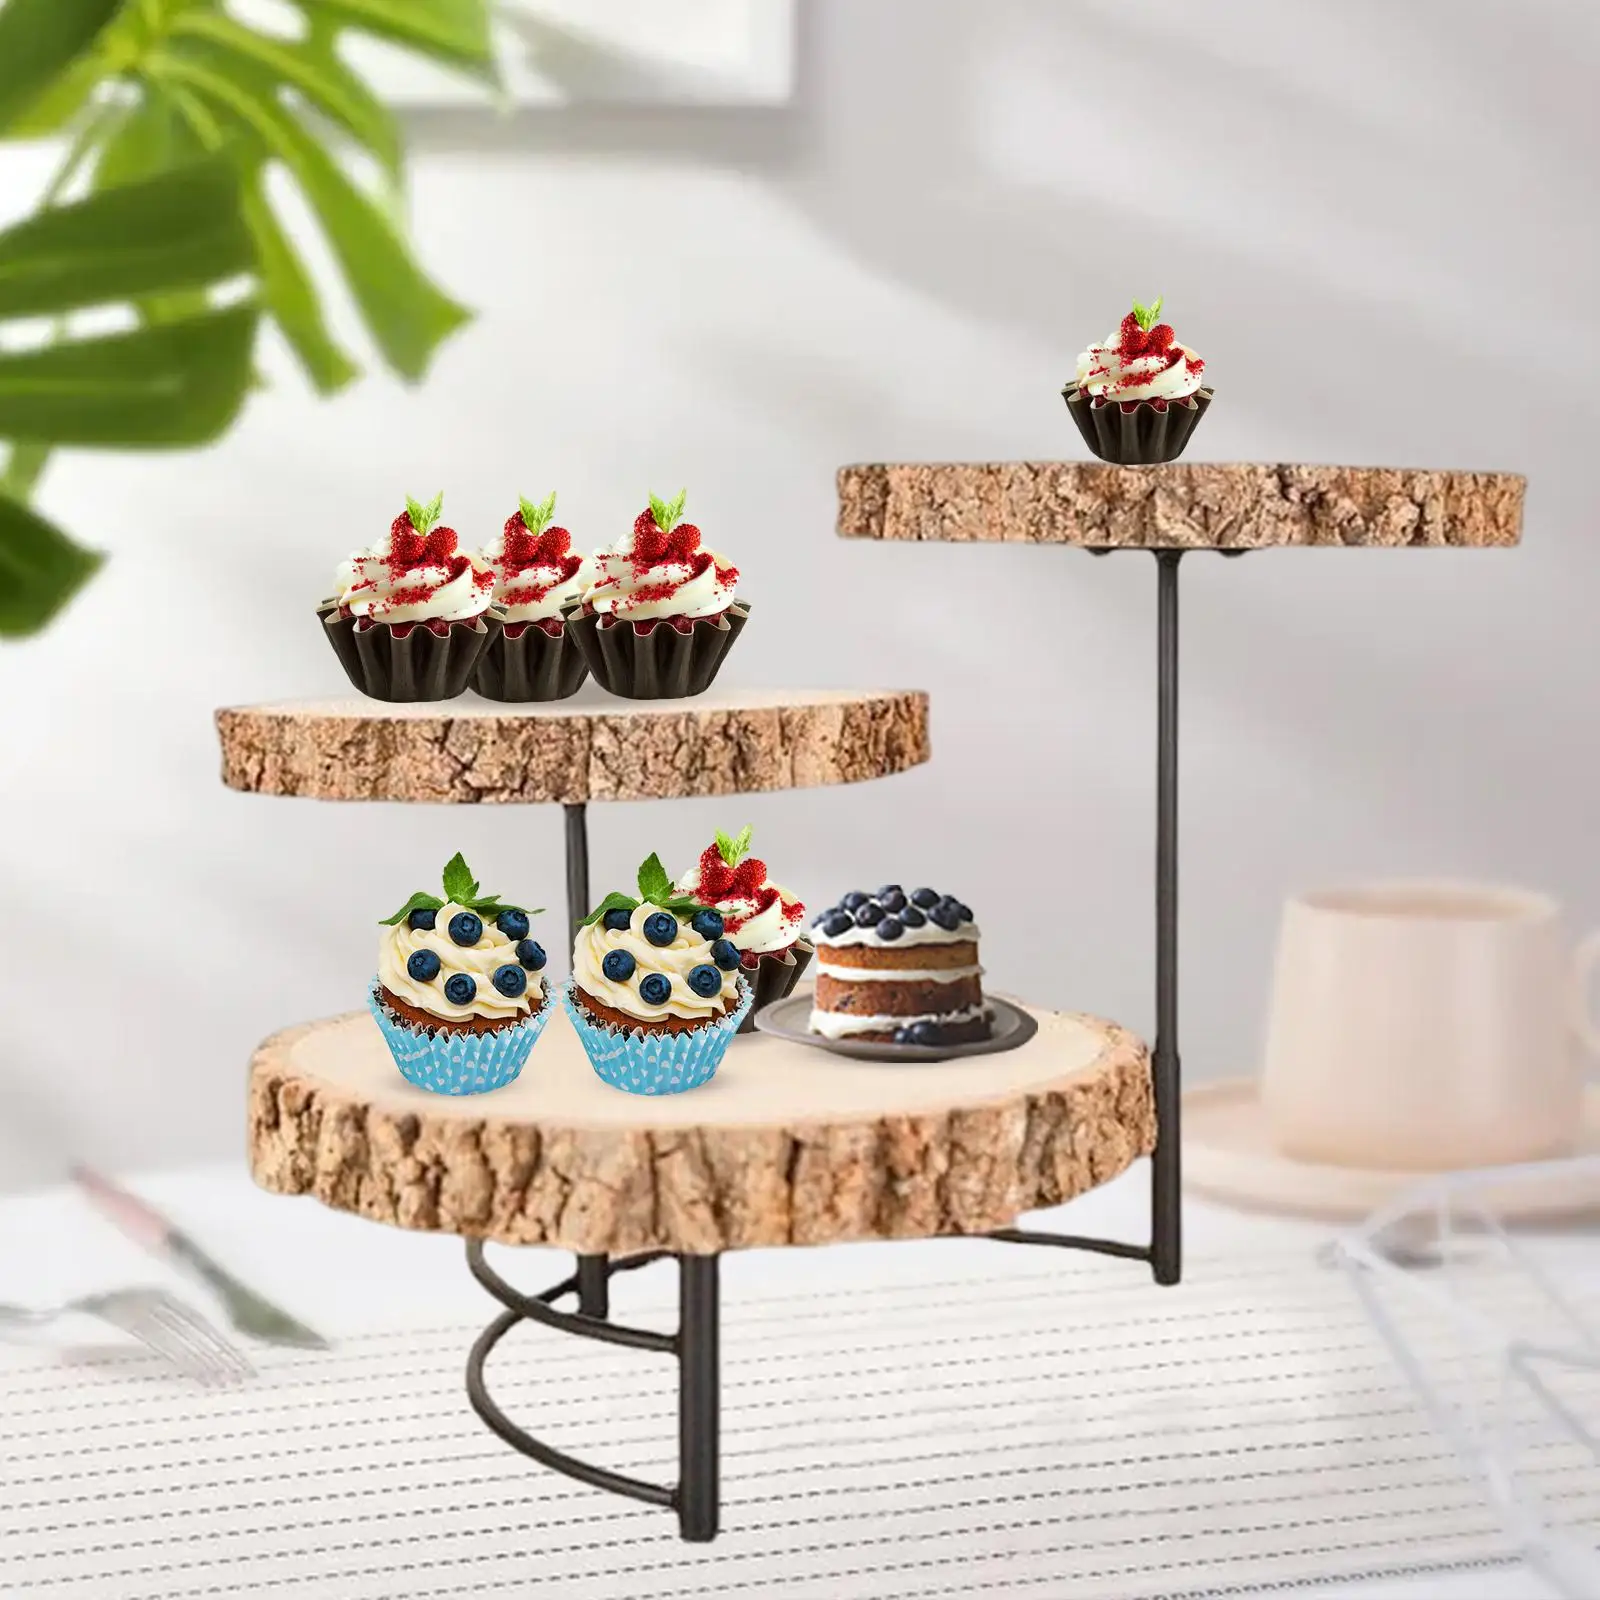 Removable Cupcake Cake Stands 3 Layer Serving Platter Round Cake Pedestal Stand Living Room Party Wedding Entertaining Hotel